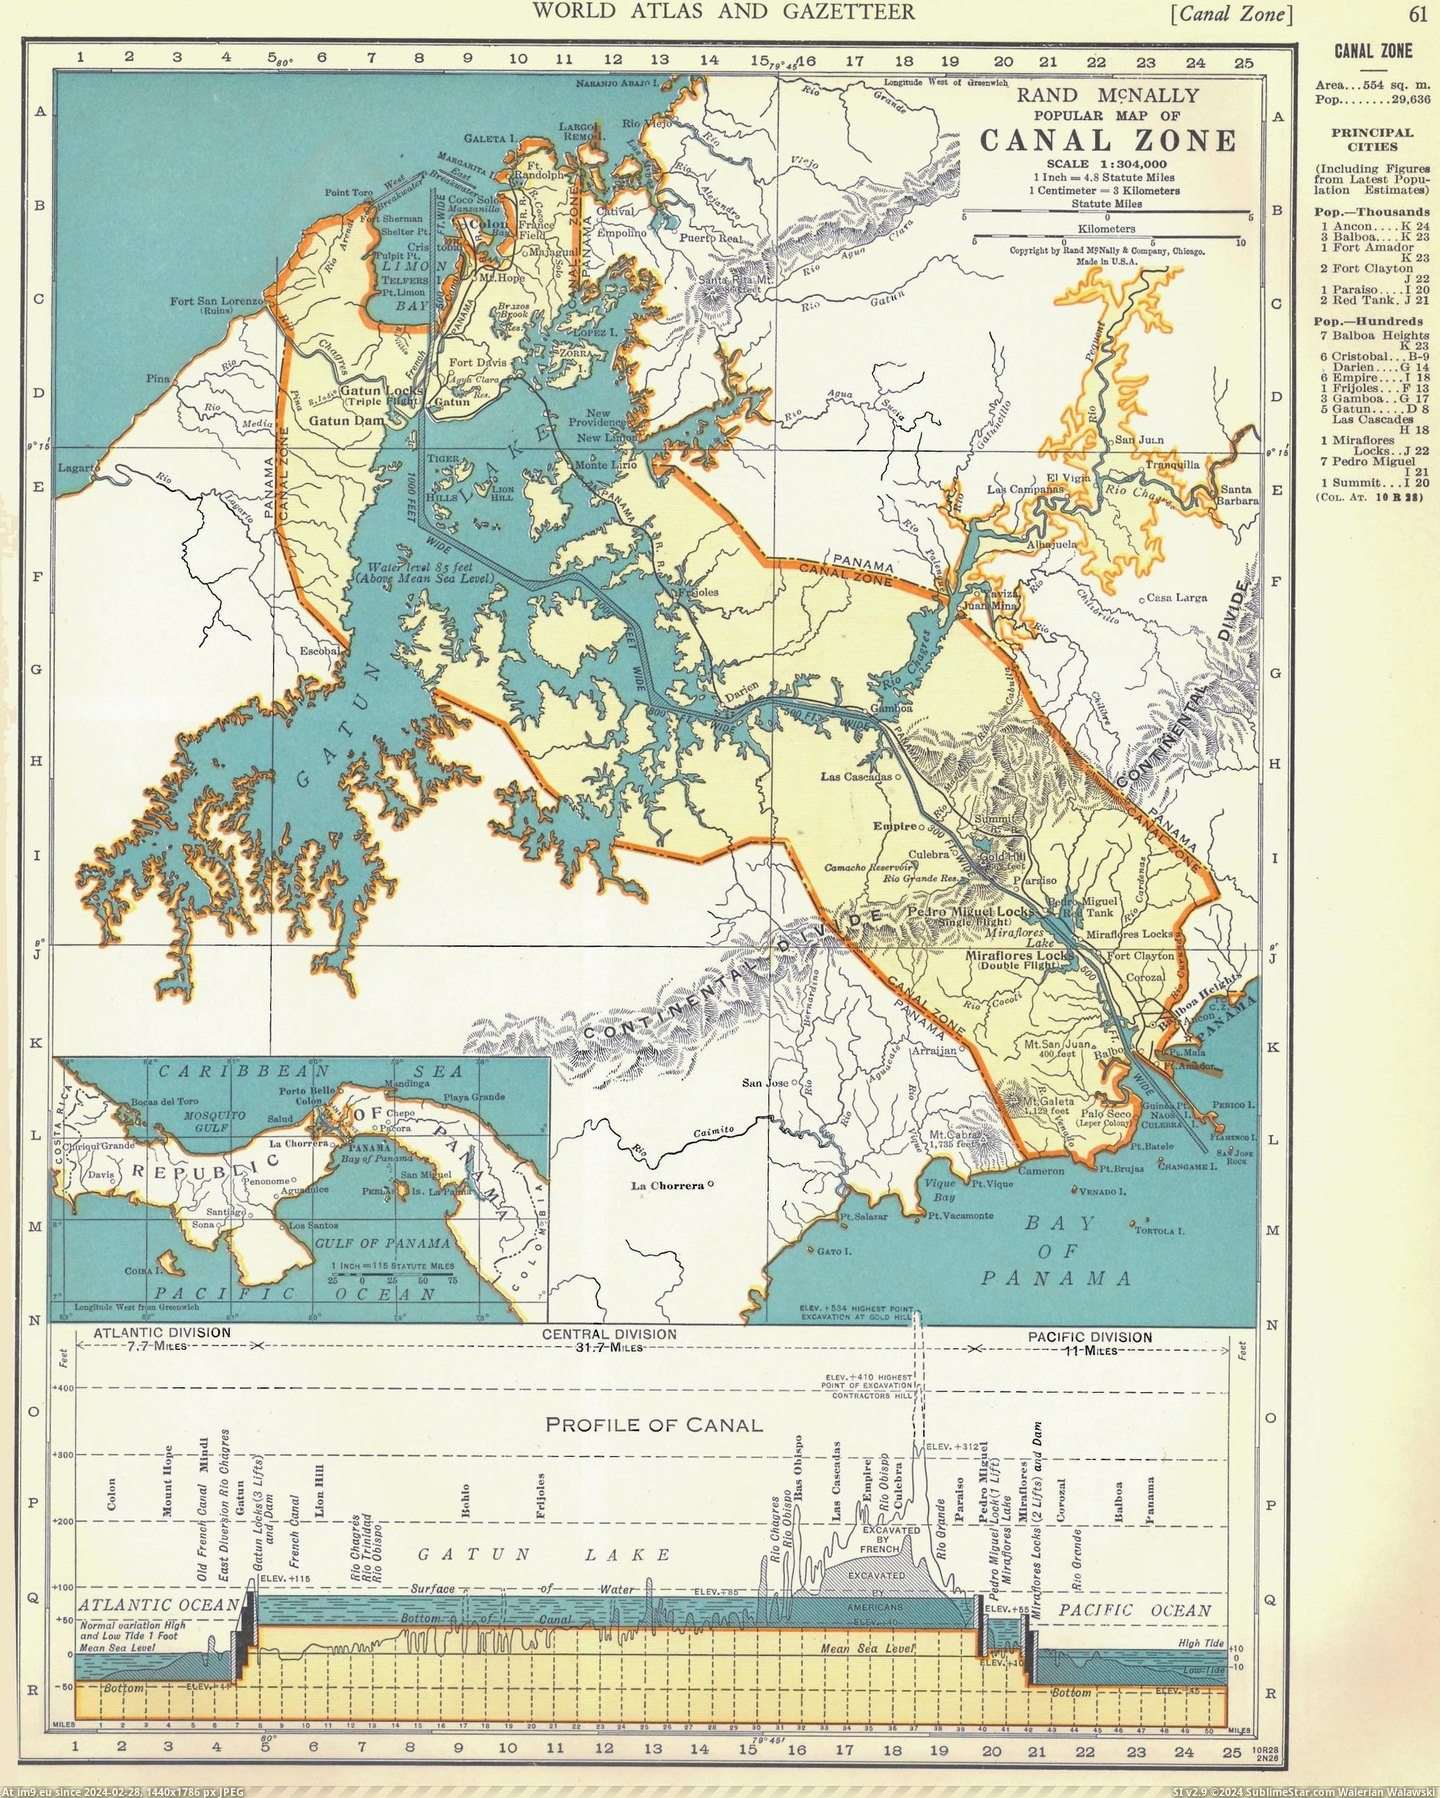 #Panama #Zone #Canal [Mapporn] Panama Canal Zone 1939 [2073x2583] Pic. (Изображение из альбом My r/MAPS favs))